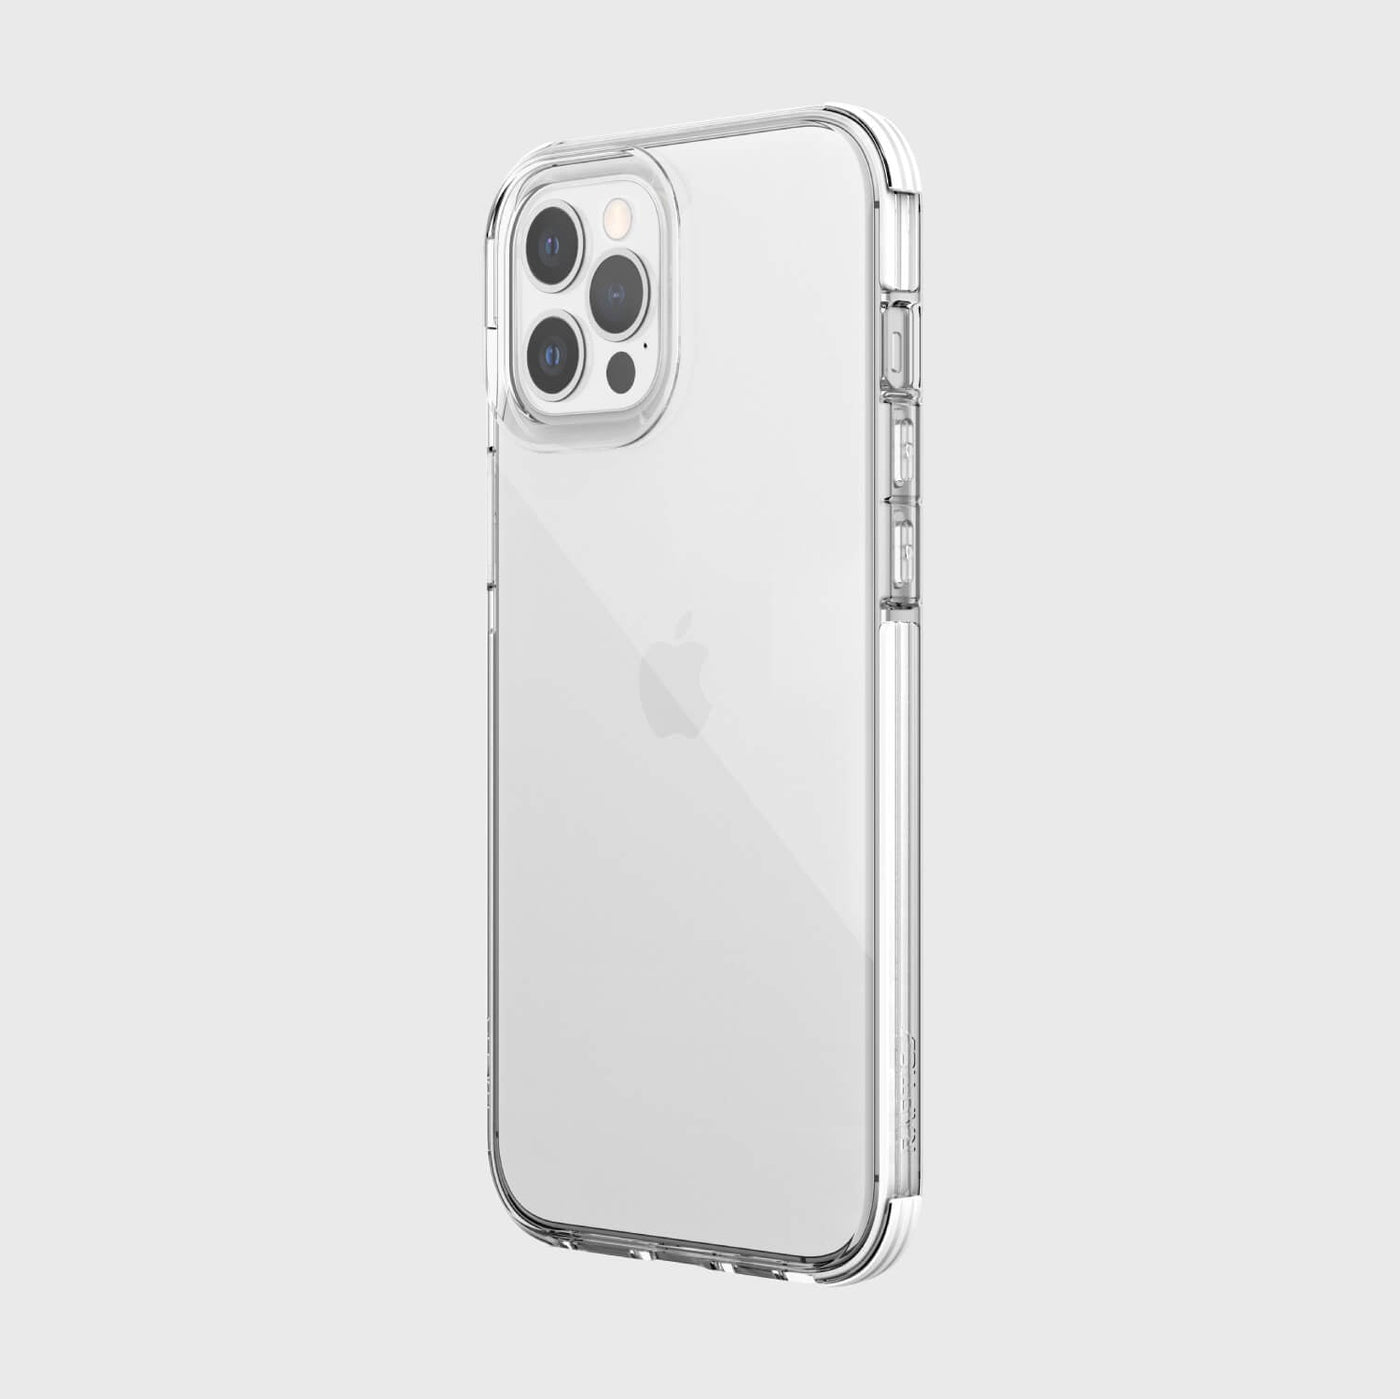 iPhone 12 Pro Max Case - CLEAR